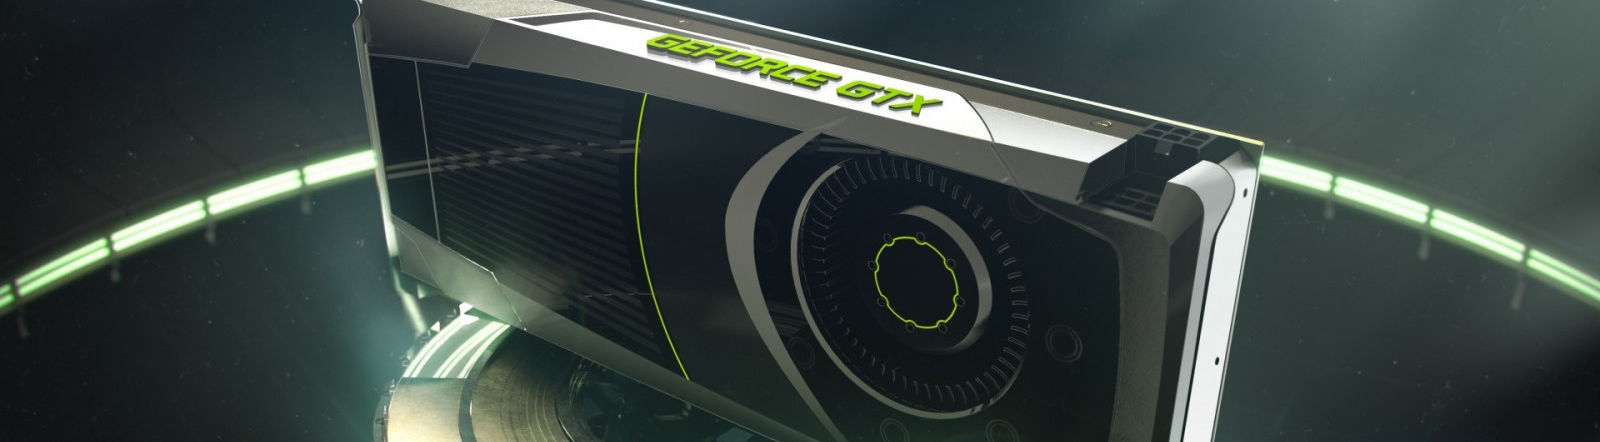 NVIDIA GeForce GT 720 in 20 GAMES